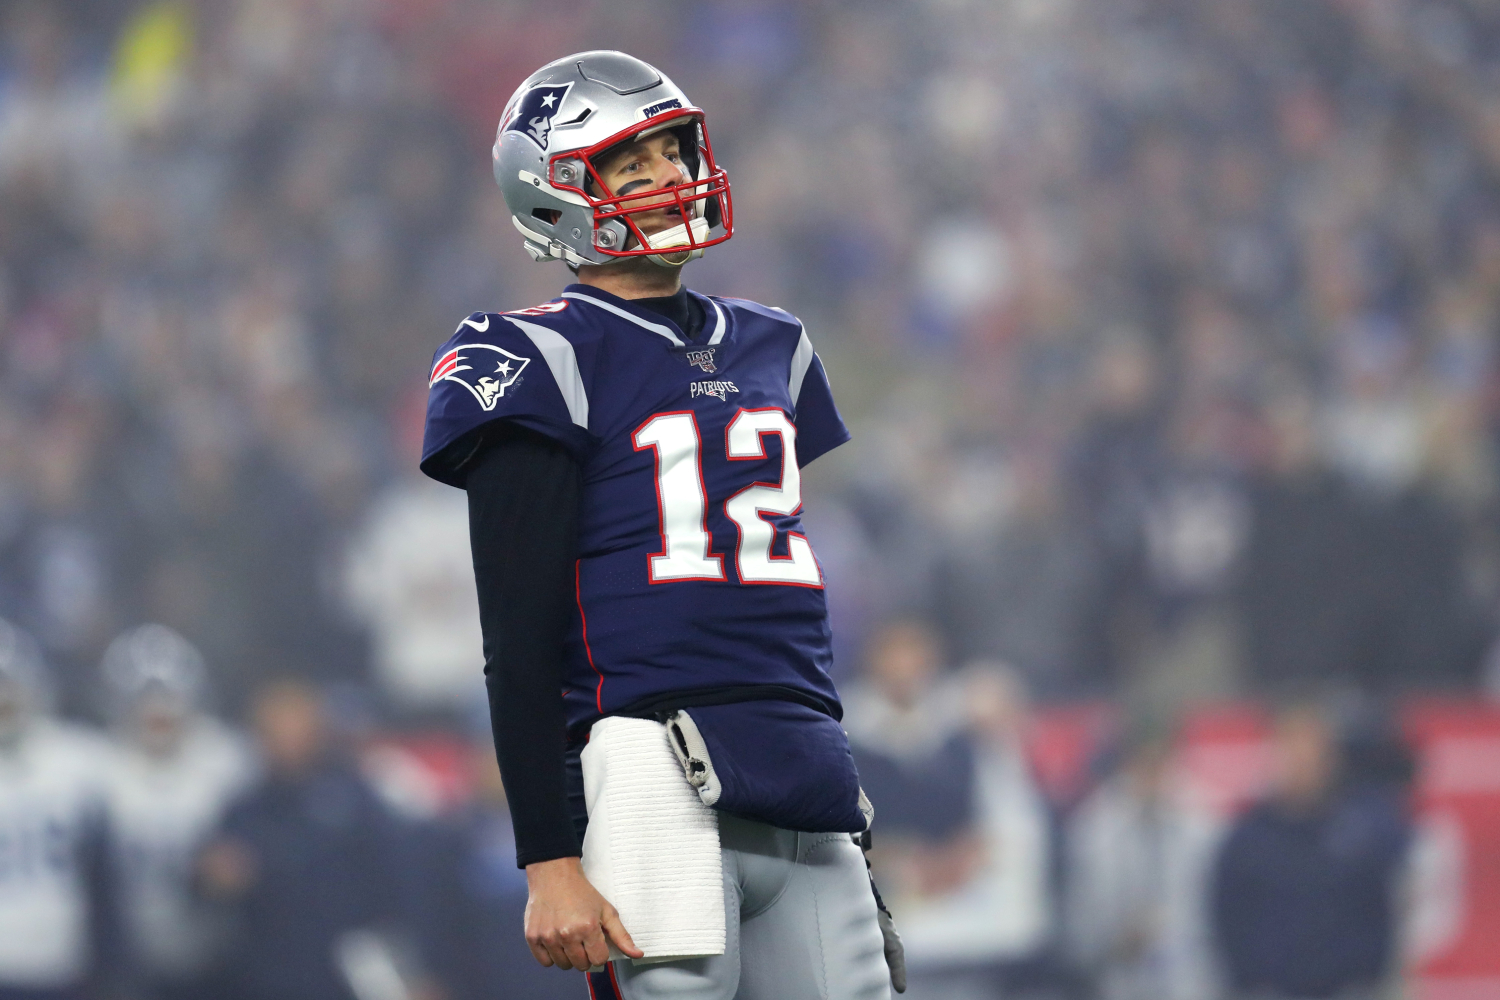 Some former New England Patriots coaches are hinting that Tom Brady may not be the GOAT.